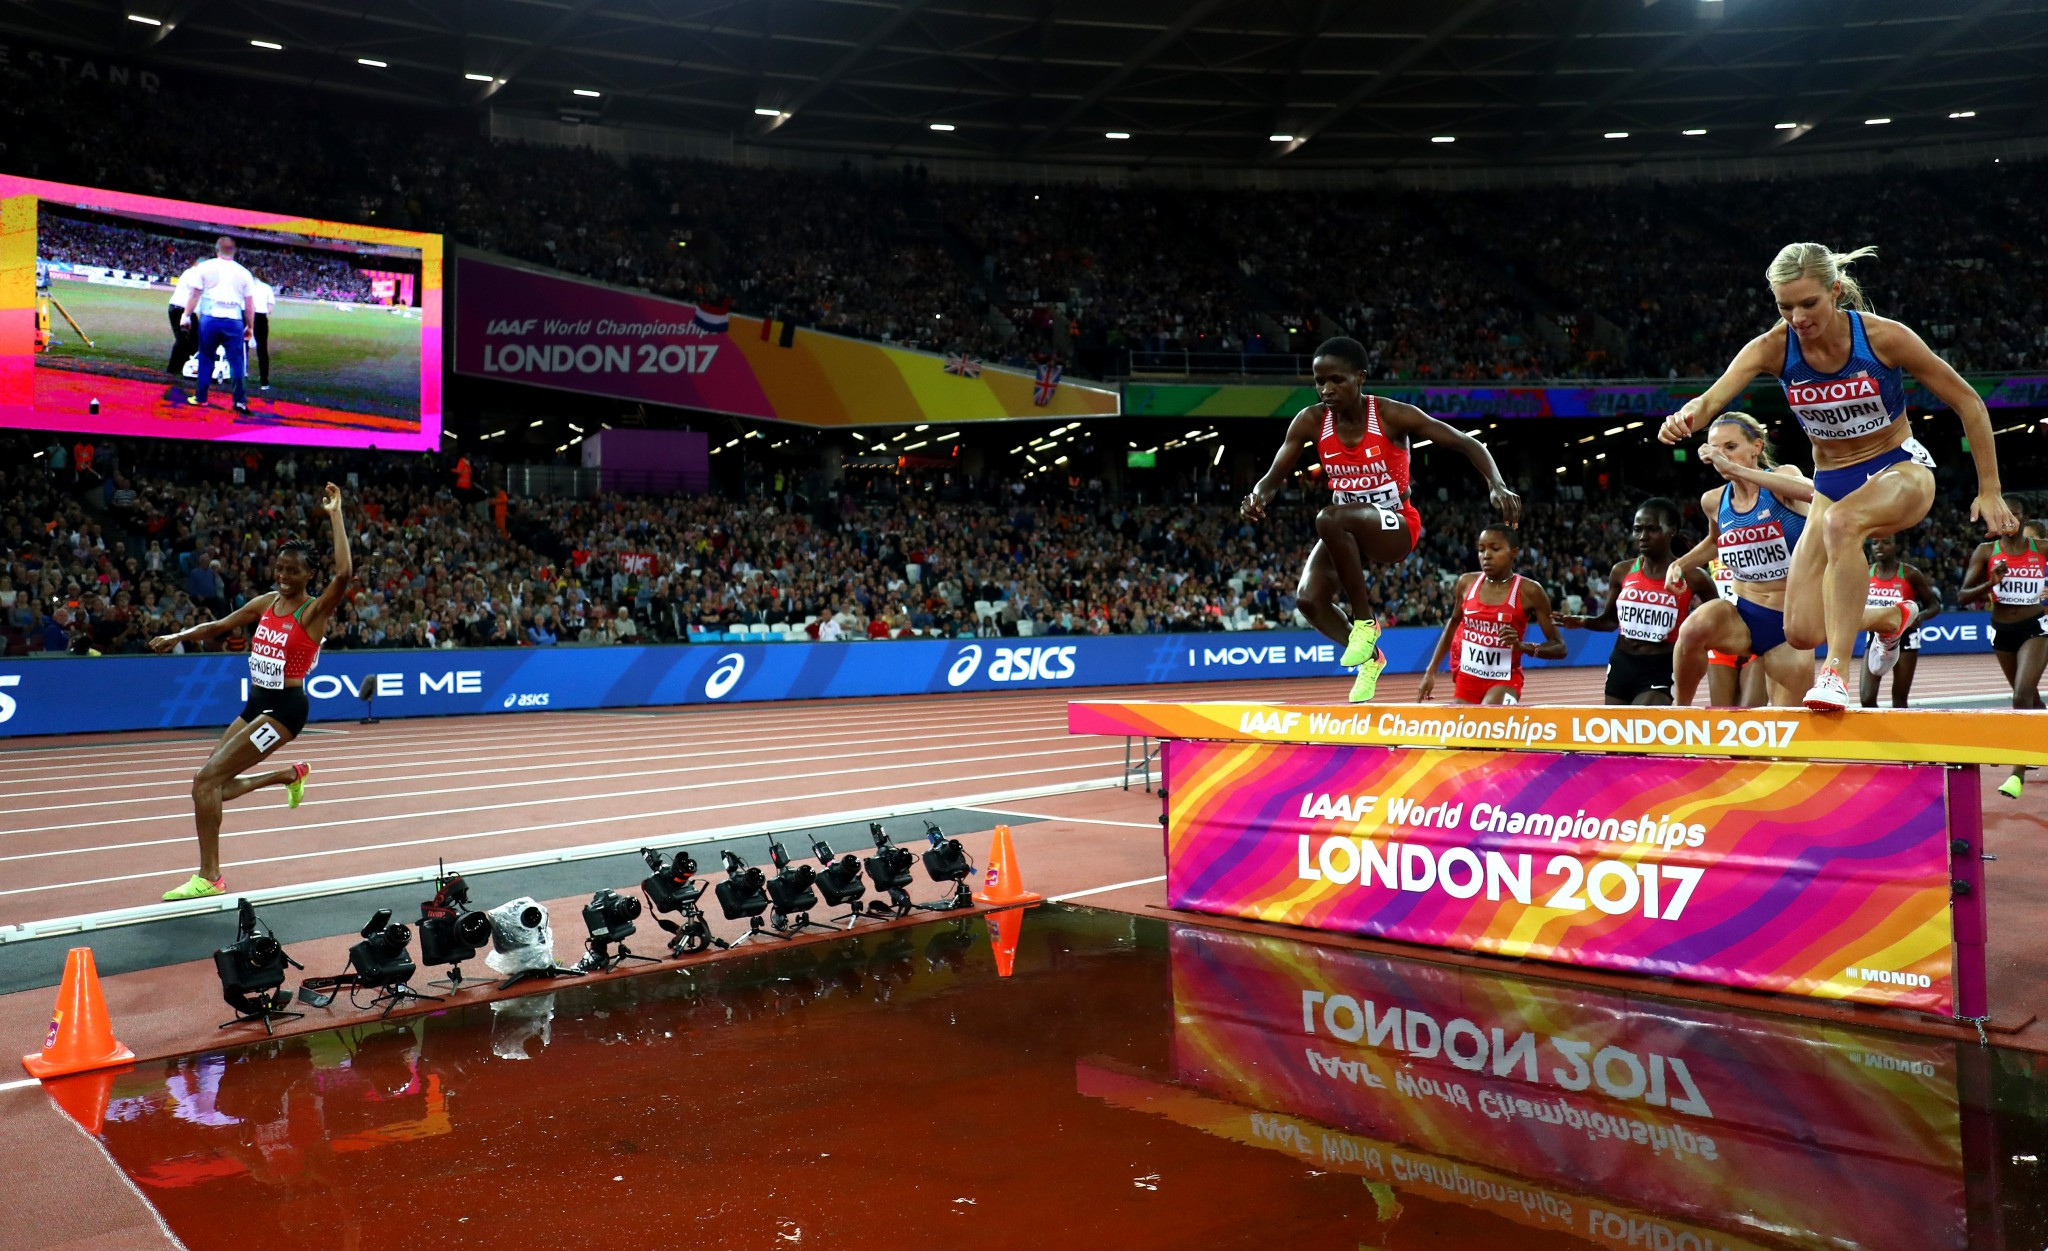 Coburn wins 3,000m steeplechase at IAAF World Championships after